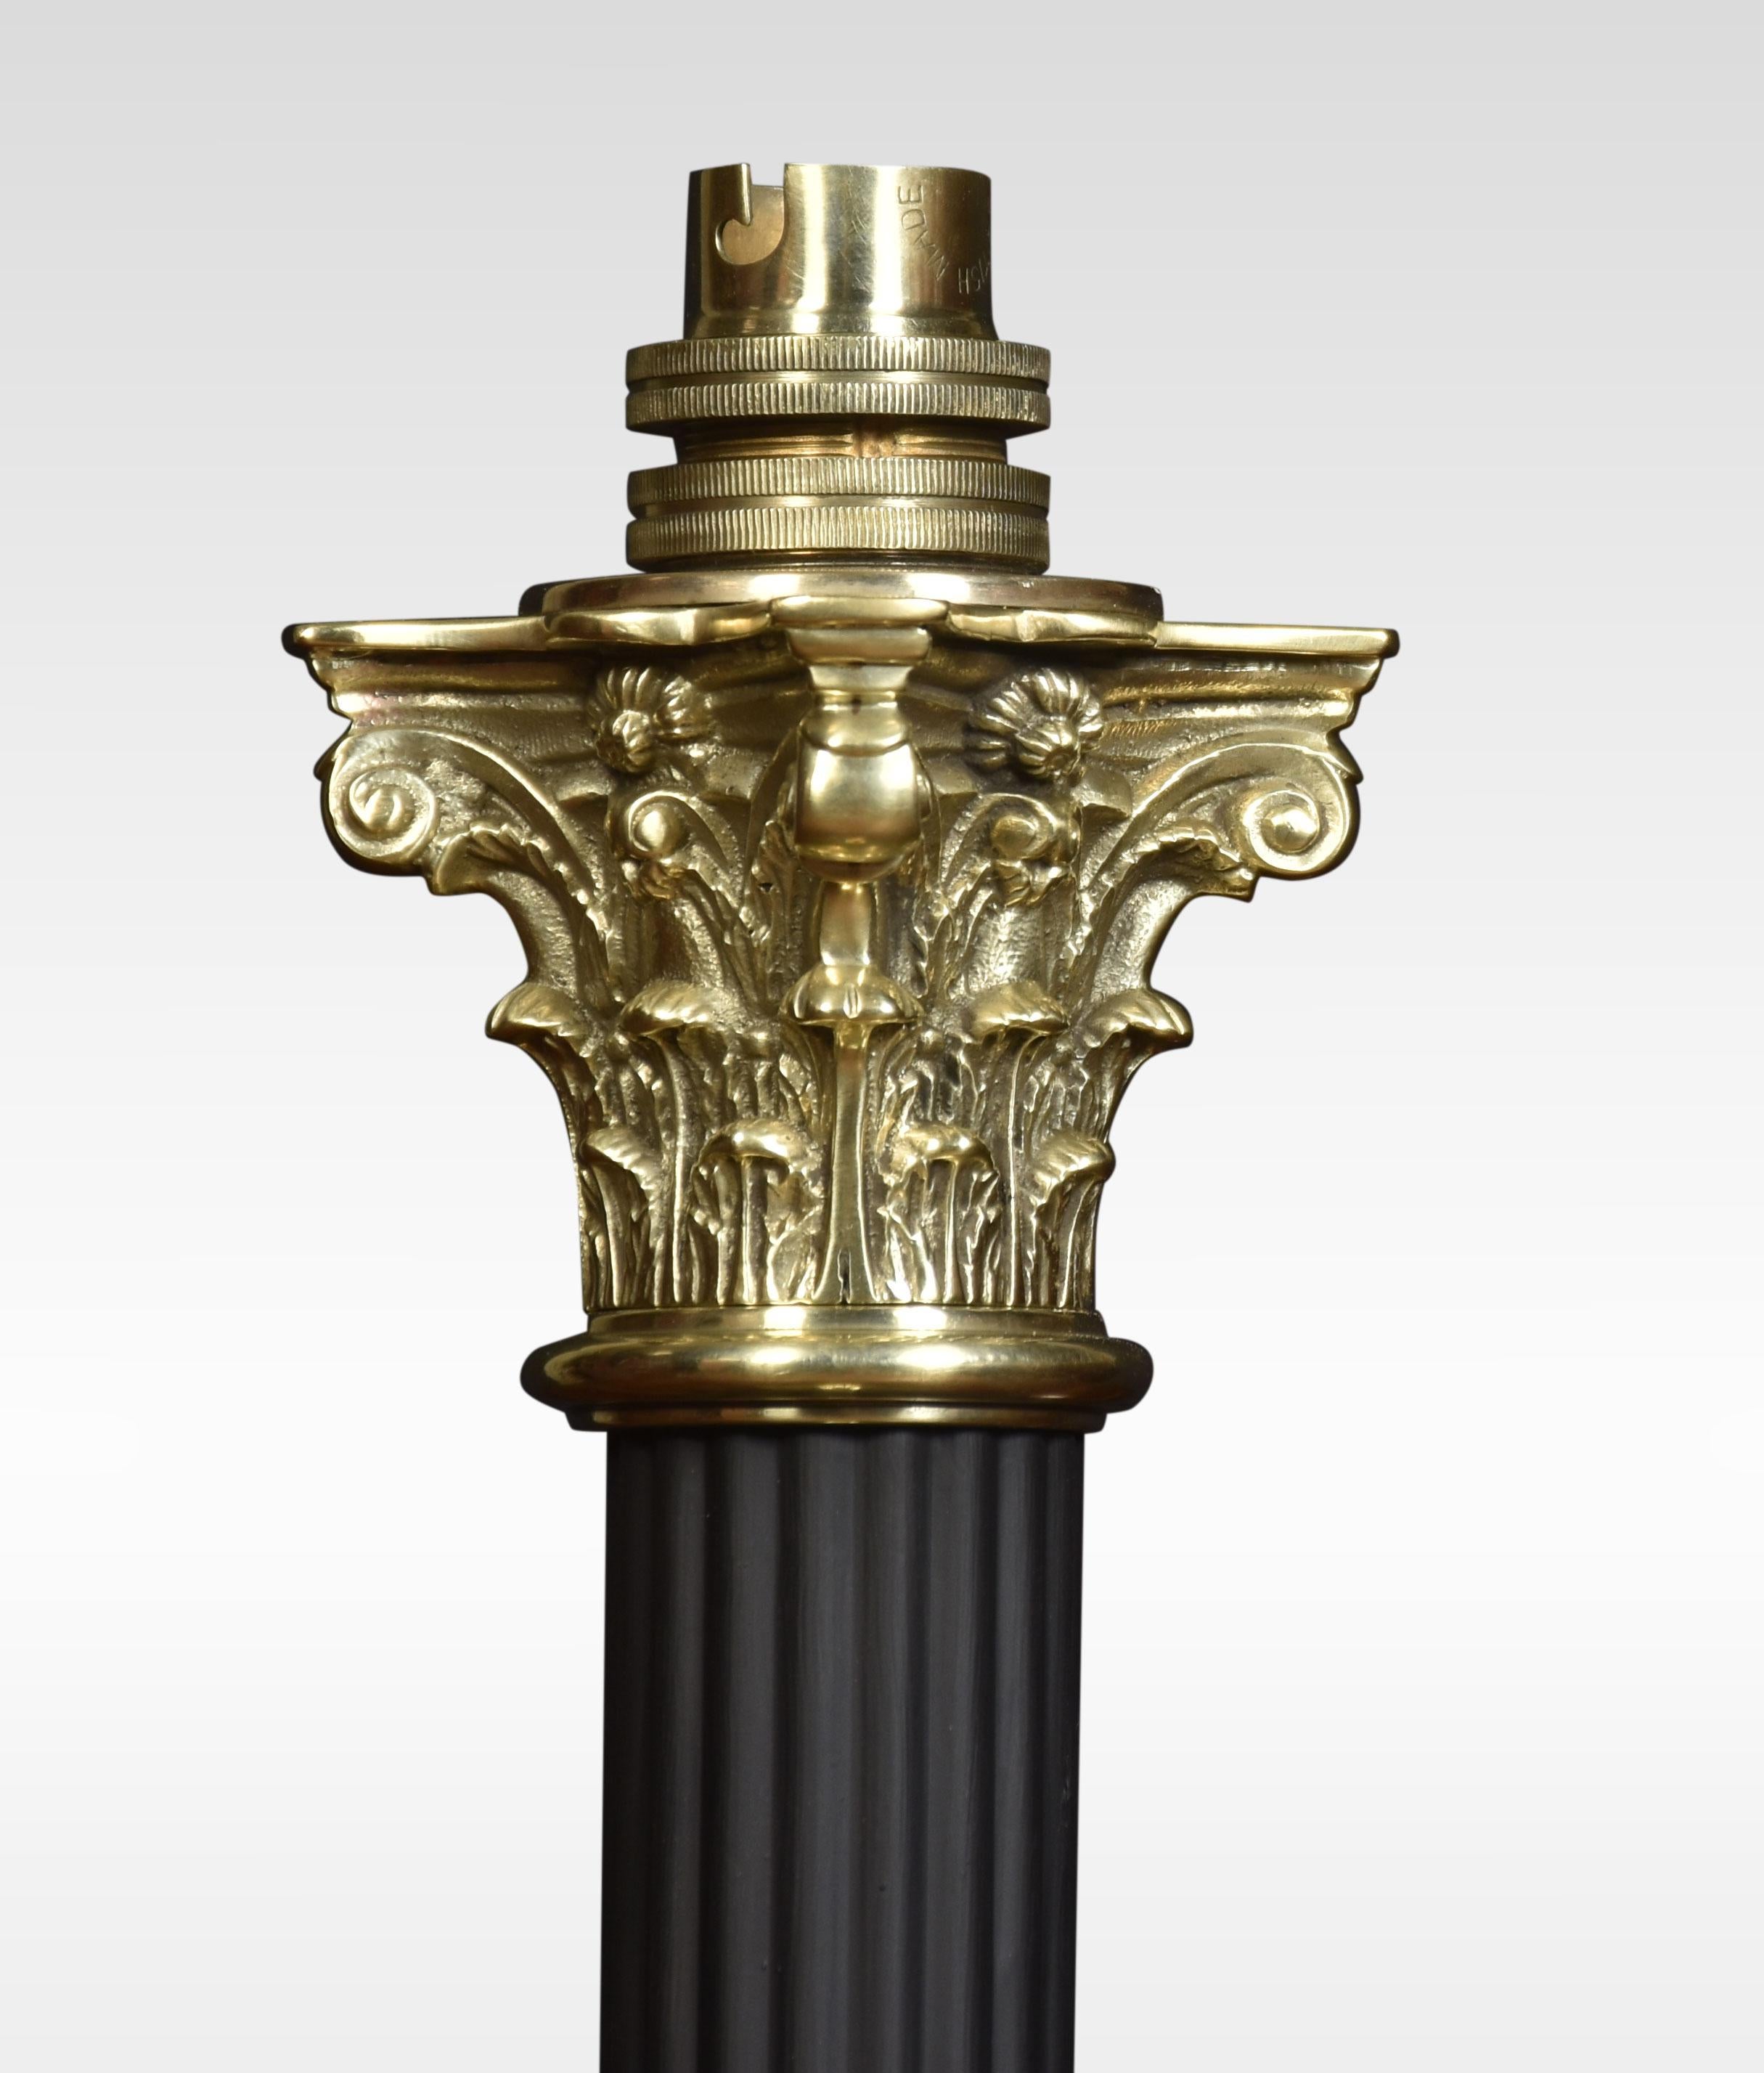 Brass table lamp, having a Corinthian column on a stepped square base. The lamp has been rewired.
Dimensions
Height 17 Inches
Width 5.5 Inches
Depth 5.5 Inches.